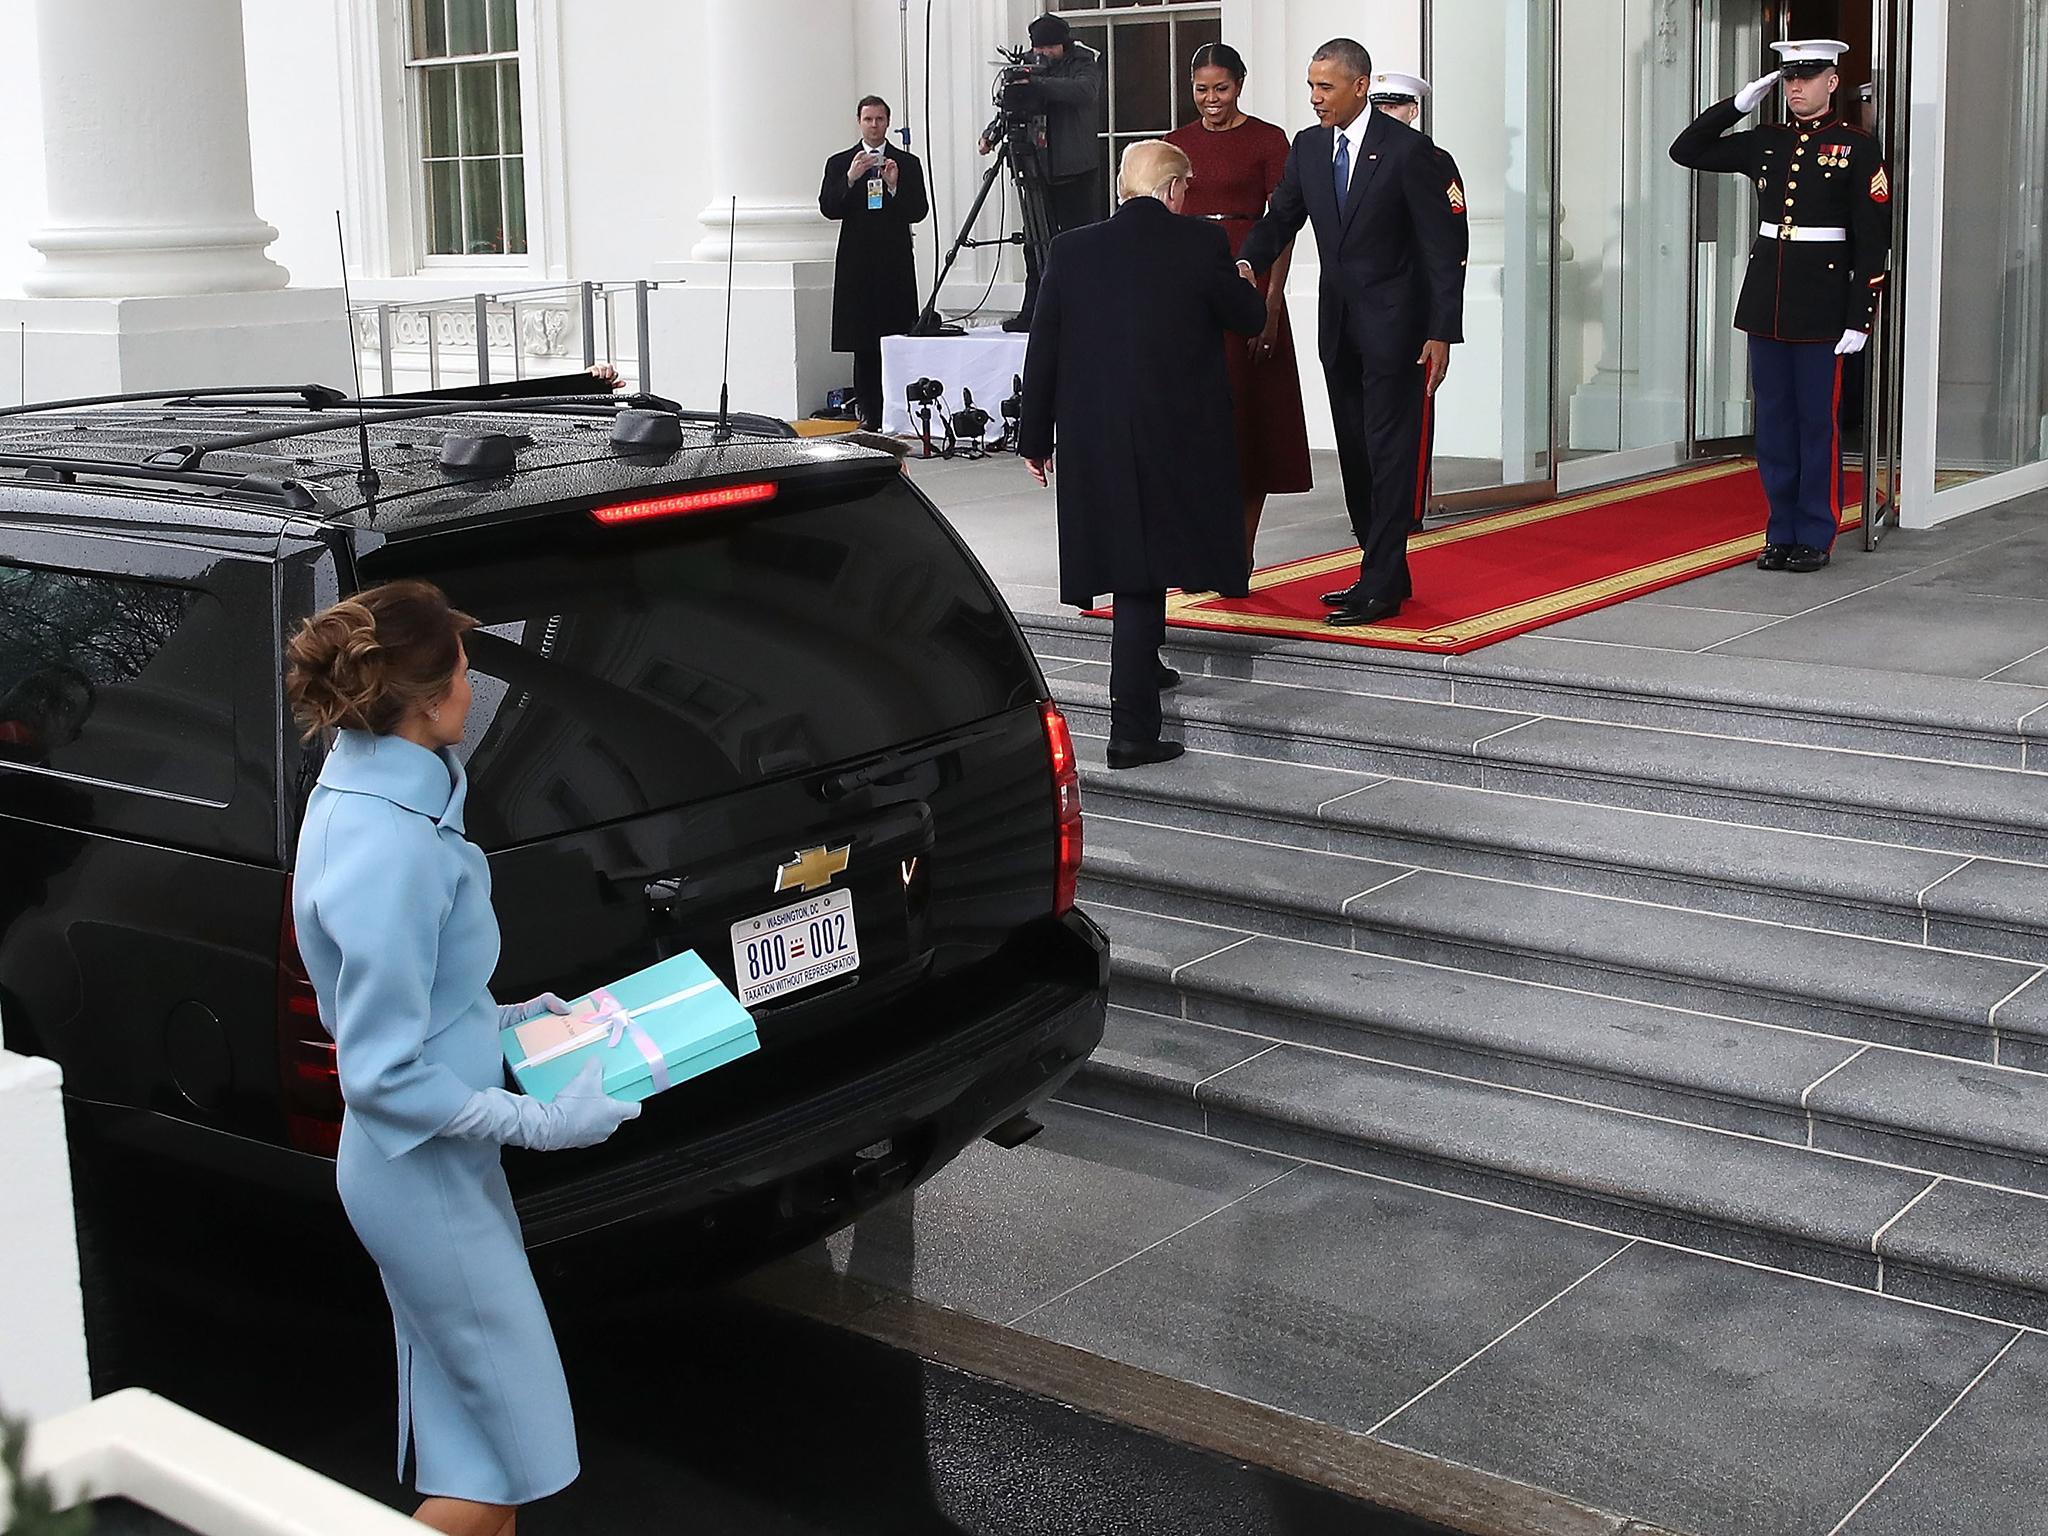 President Trump was criticised for walking ahead of Melania Trump when meeting the Obamas at the White House.